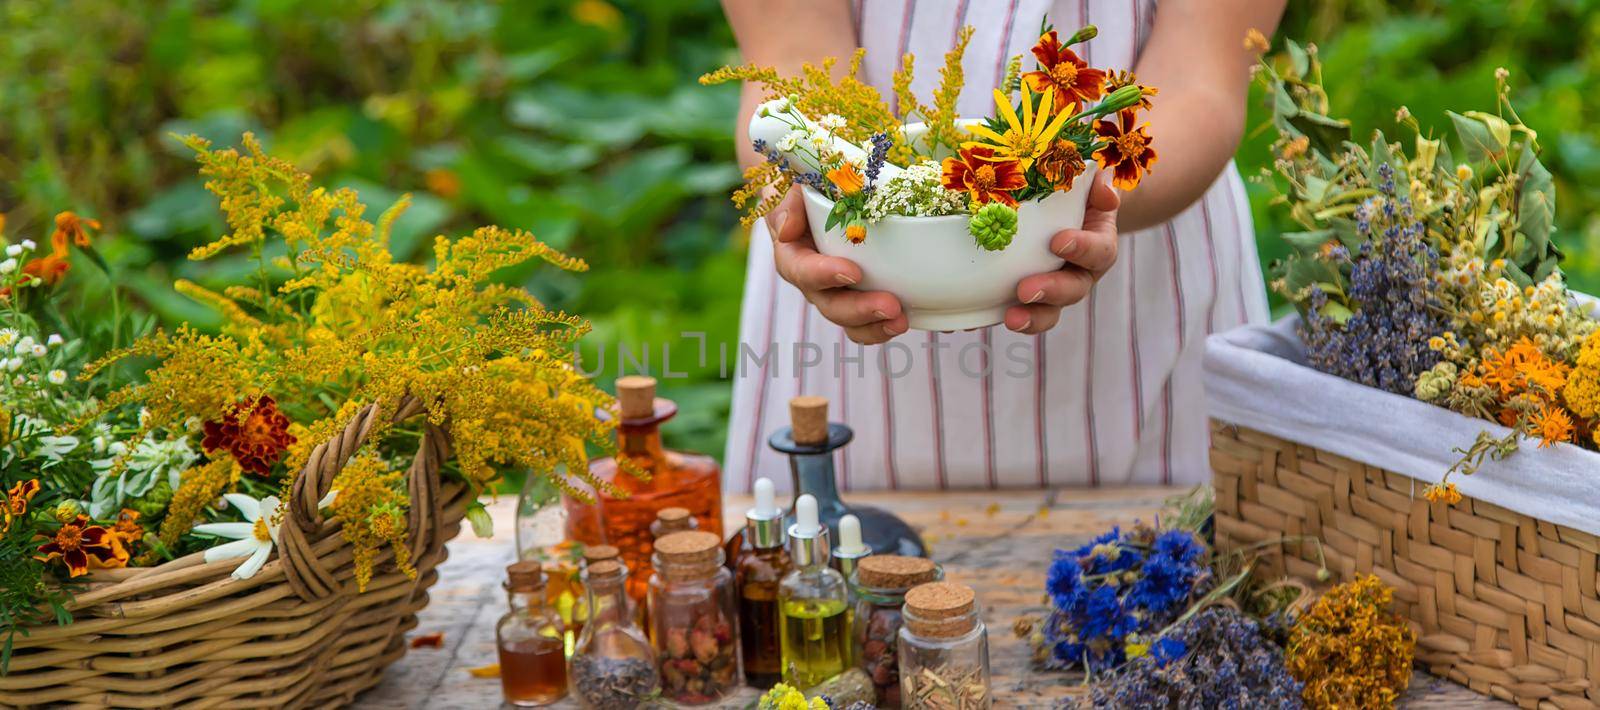 Woman with medicinal herbs and tinctures. Selective focus. Nature.